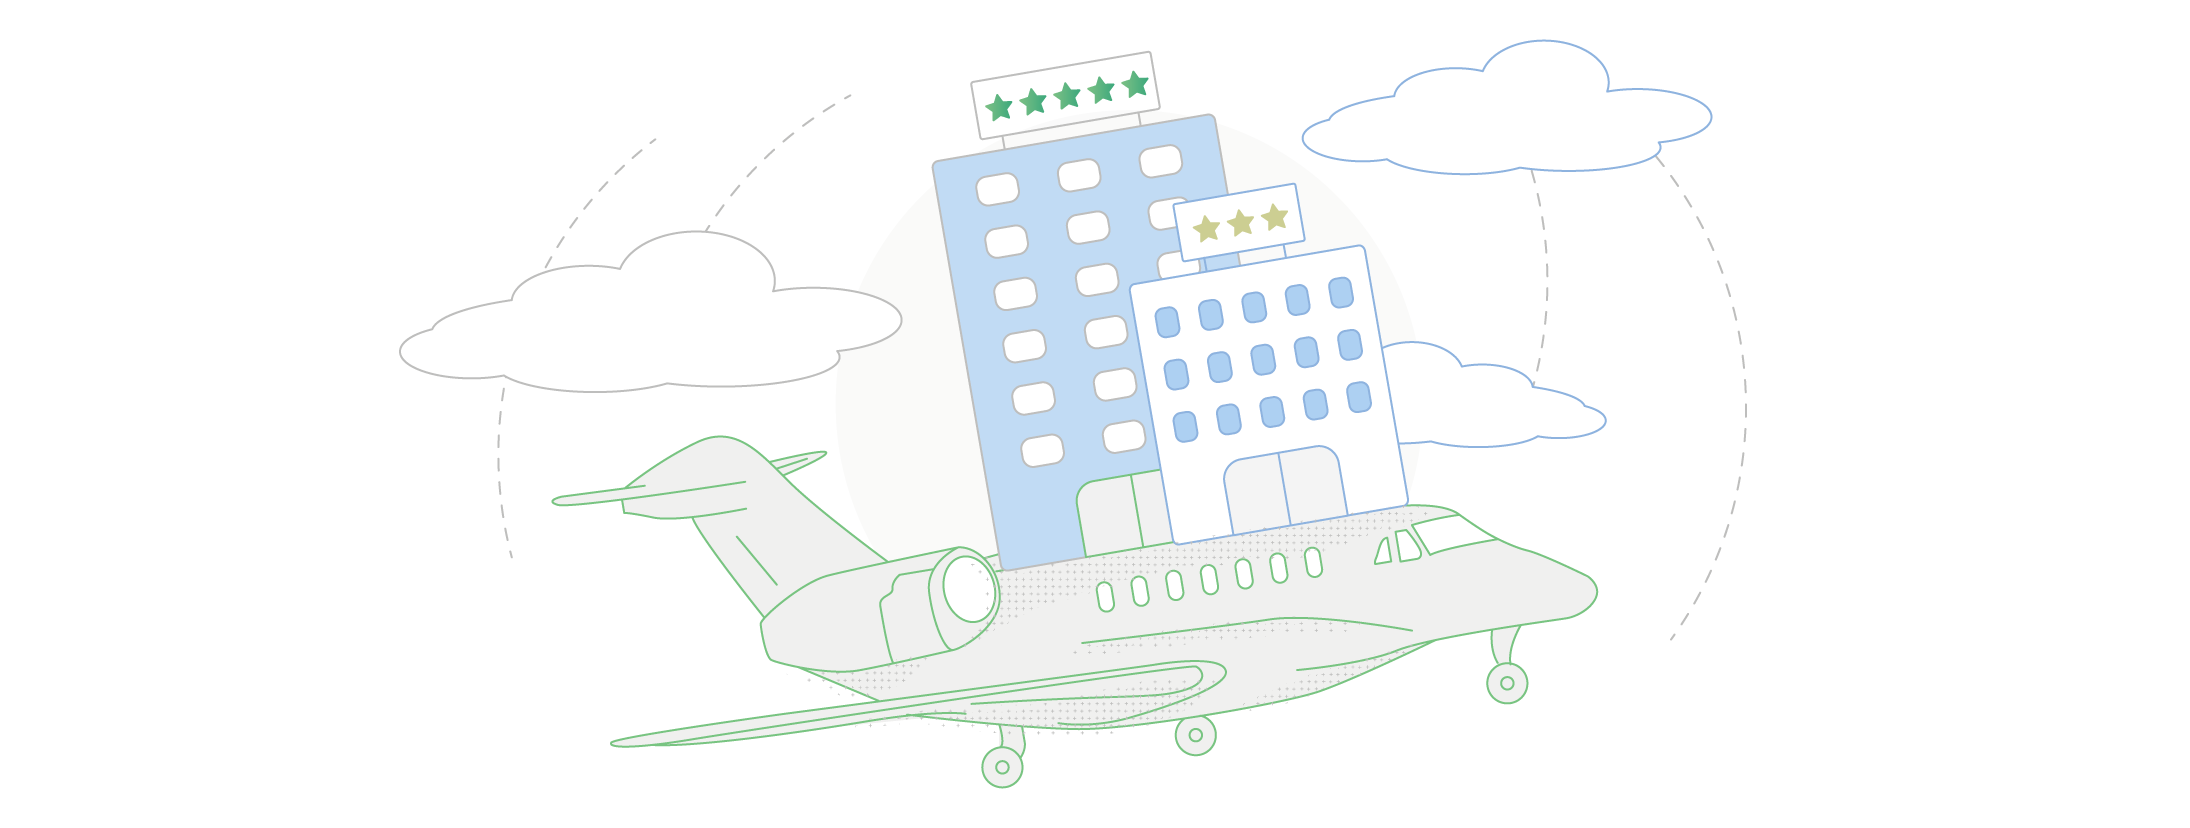 How Online Travel Merchants Can Help Their Revenues Takeoff